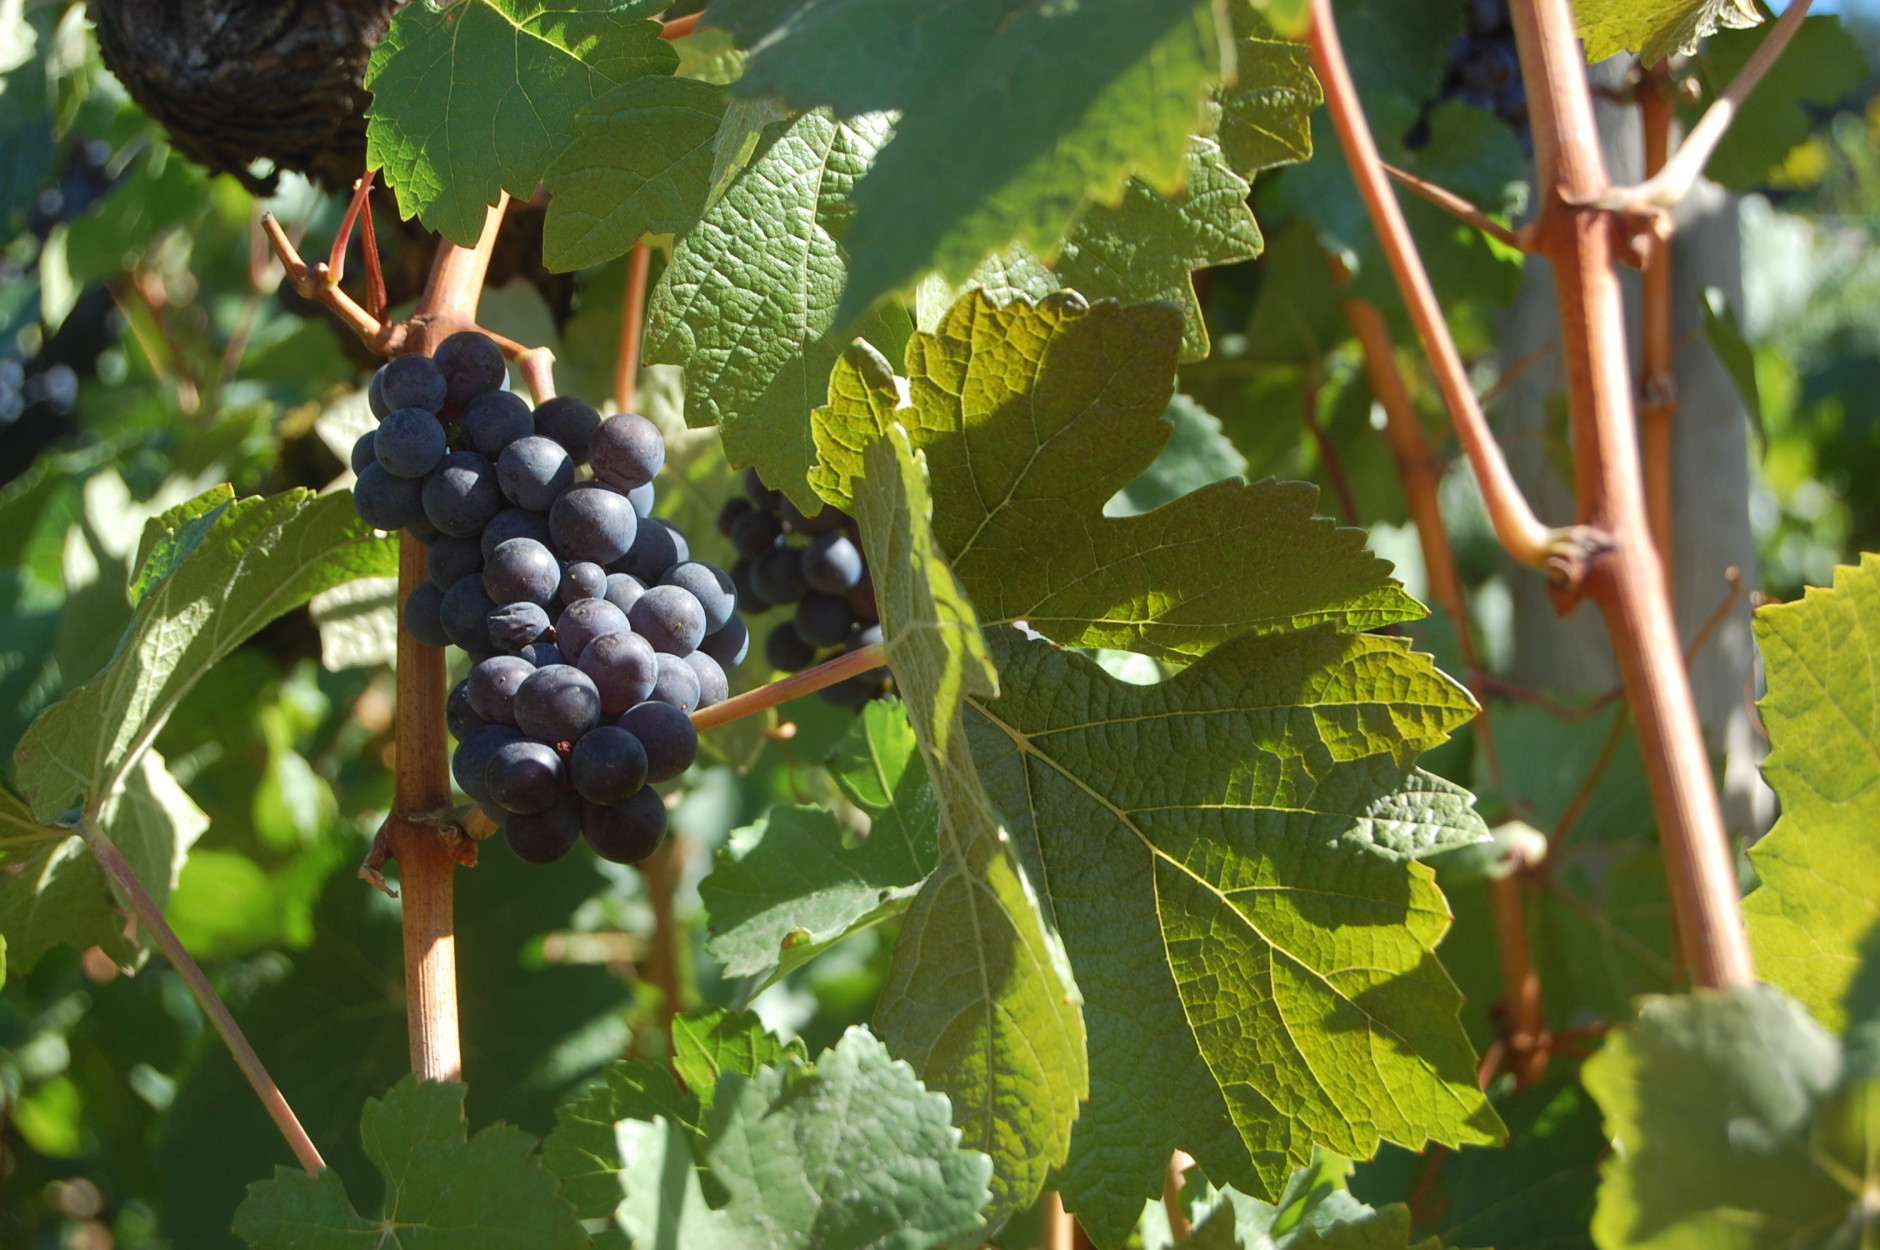 This Sept. 20, 2014 photo shows pinot noir grapes on a vine at the Willamette Valley Vineyards in Turner, Ore. The annual Grape Stomp draws hundreds of people to this winery on a hilltop to smash leftover grapes. Their goal: Get more juice in the bucket than the next guy. (AP Photo/Molly Hottle)